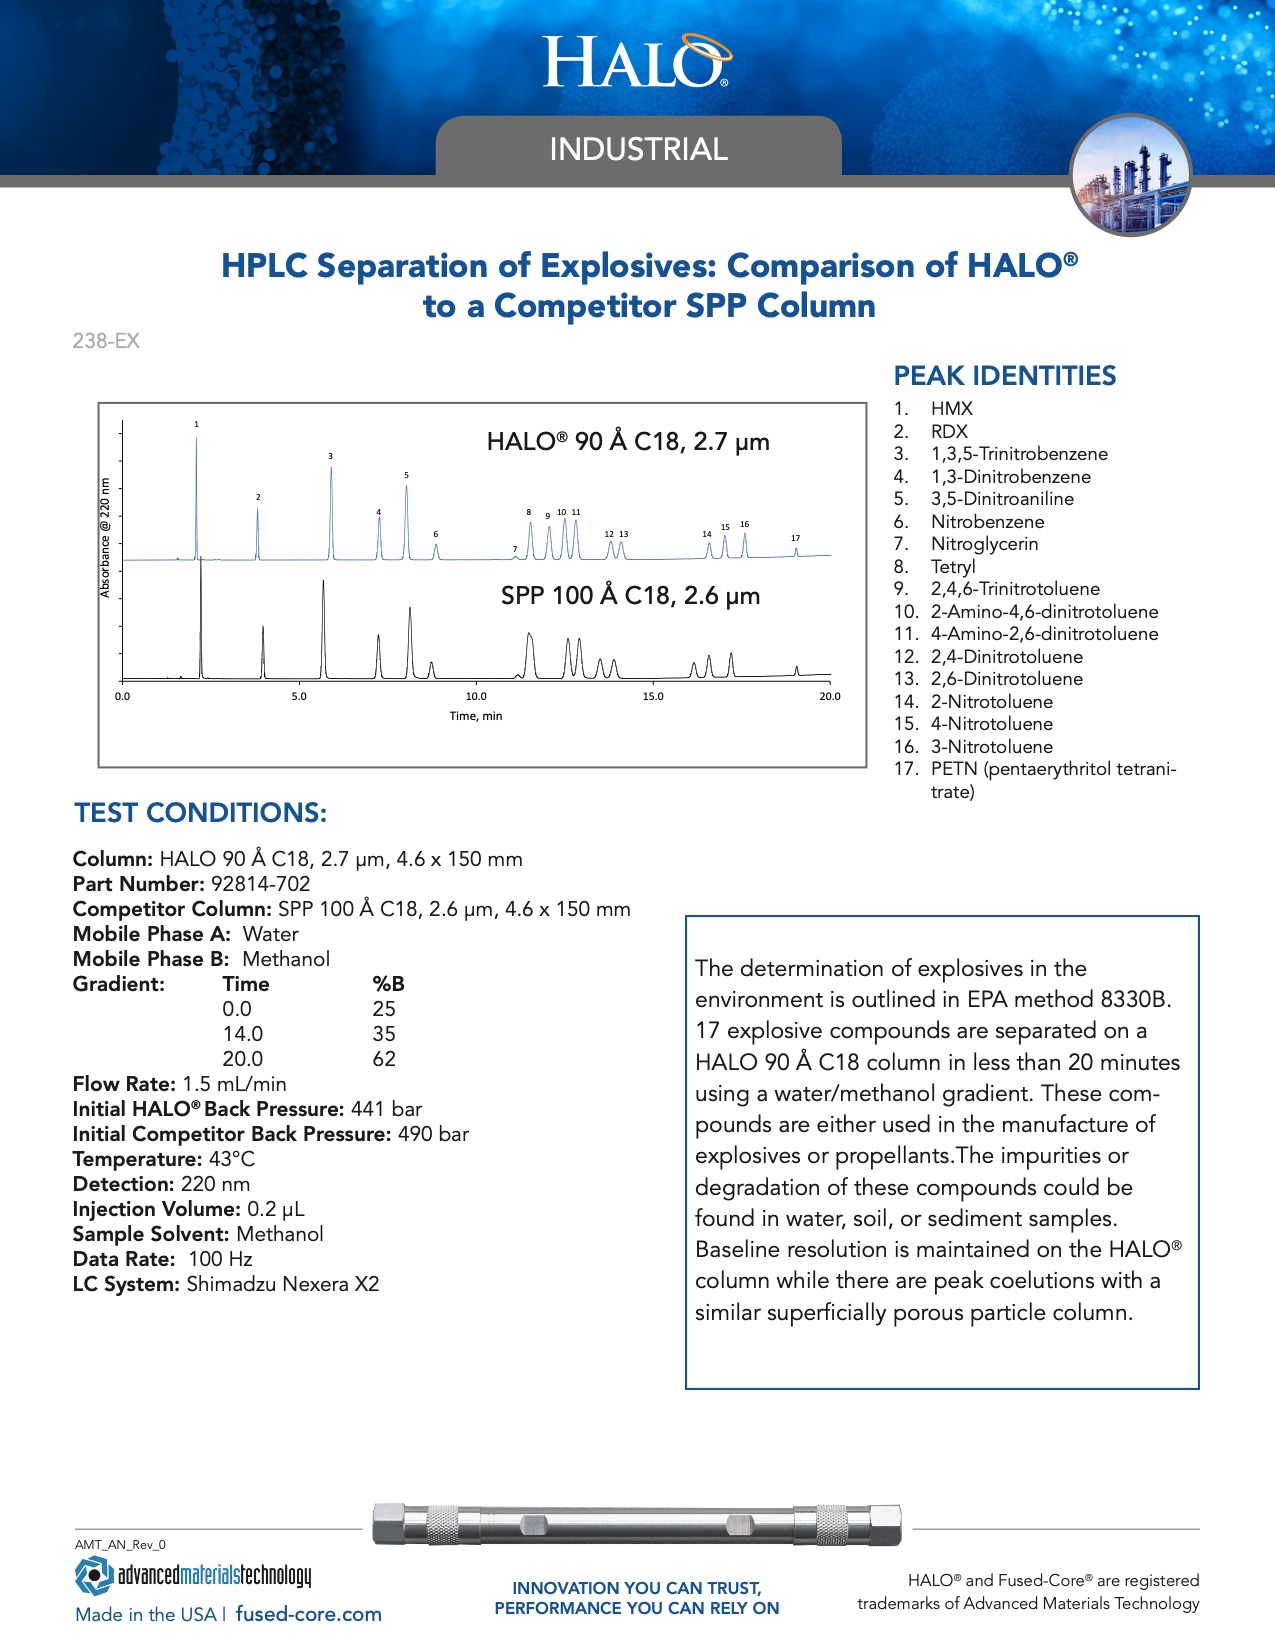 hplc separation of explosives - industrial chromatography report